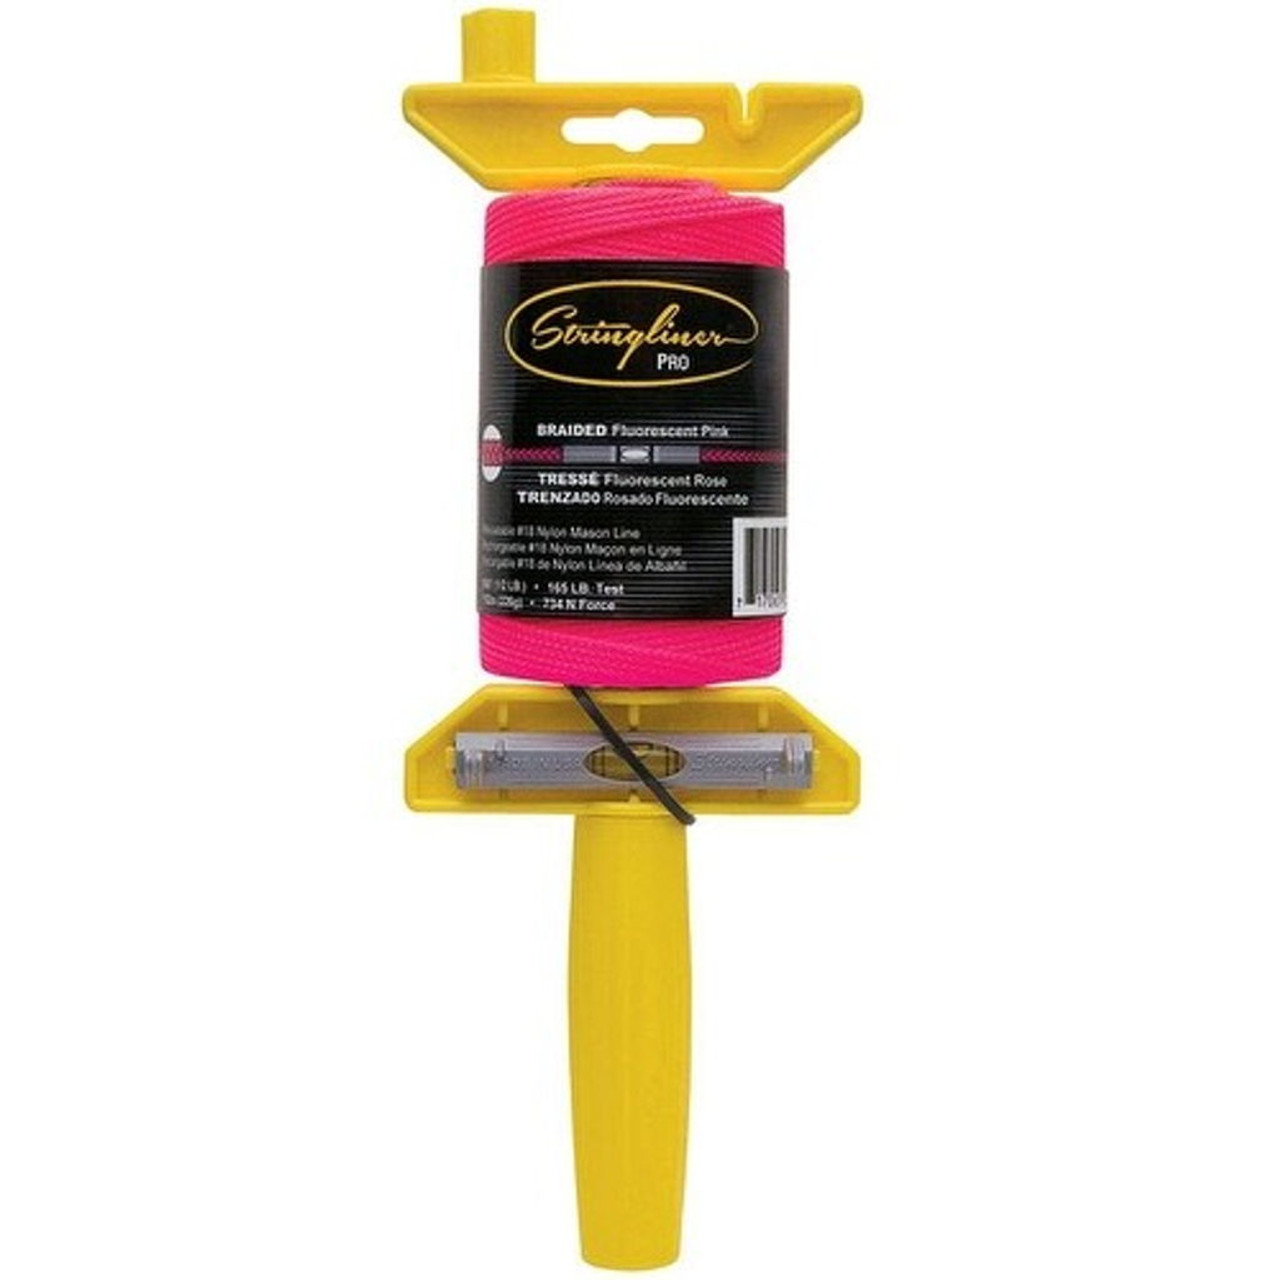 Stringliner Pro Braided Chalk Line with Reel